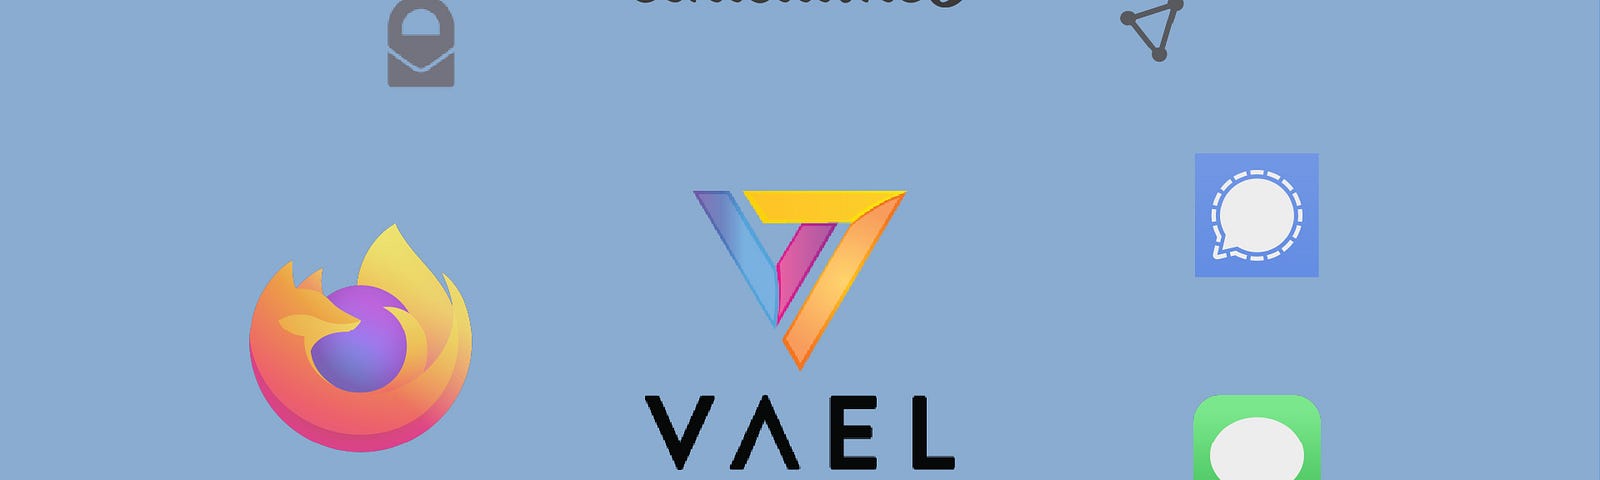 Vael, ethical.net, ProtonMail, ProtonVPN, Signal, iMessage, Tor, DuckDuckGo, and Firefox logos.